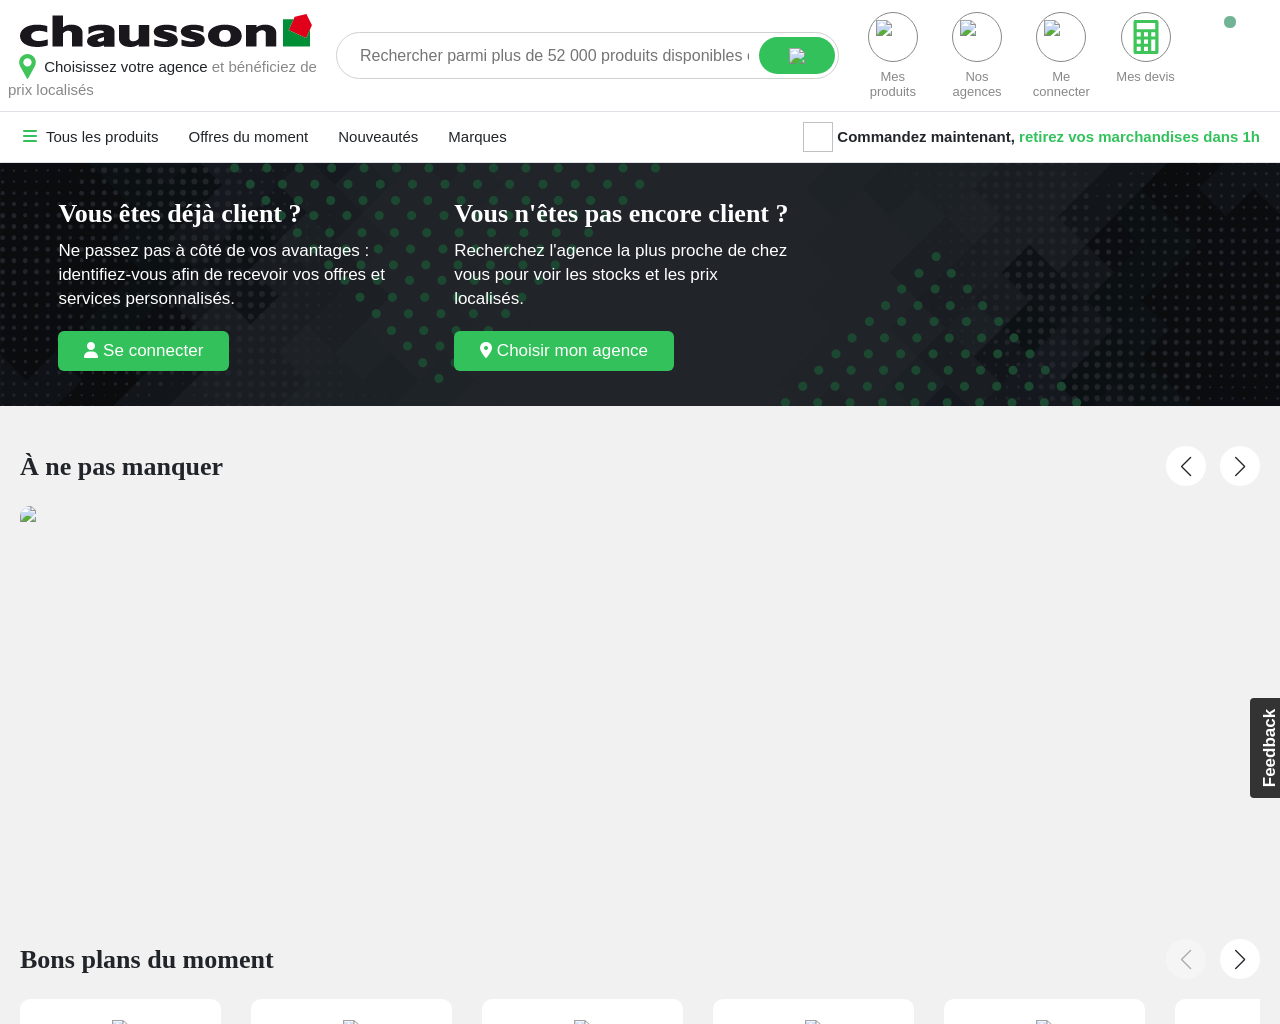 www.chausson-materiaux.fr